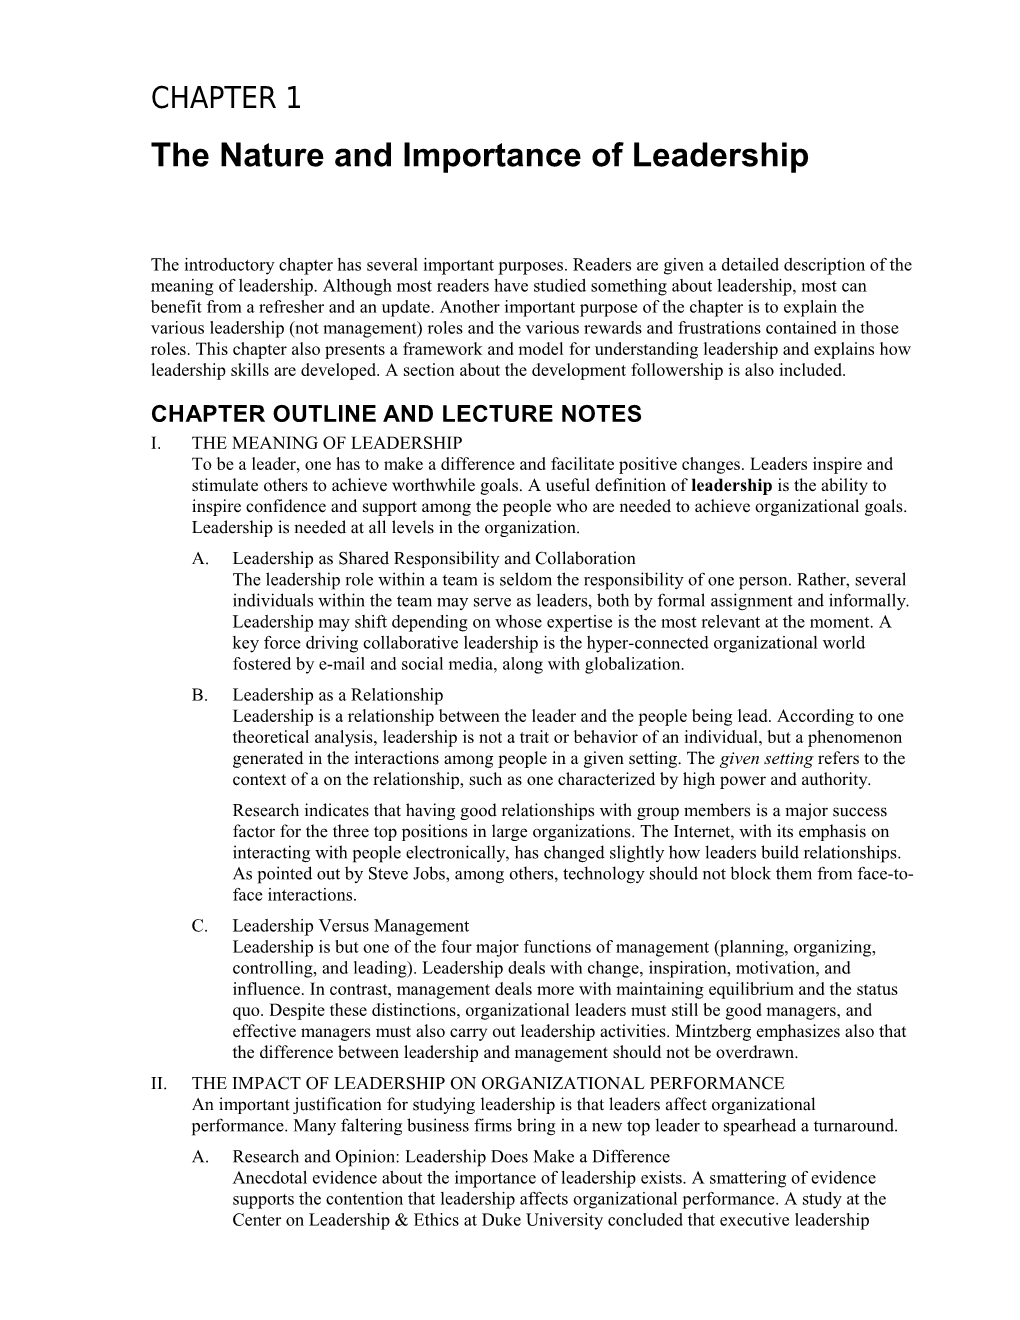 The Nature and Importance of Leadership s1